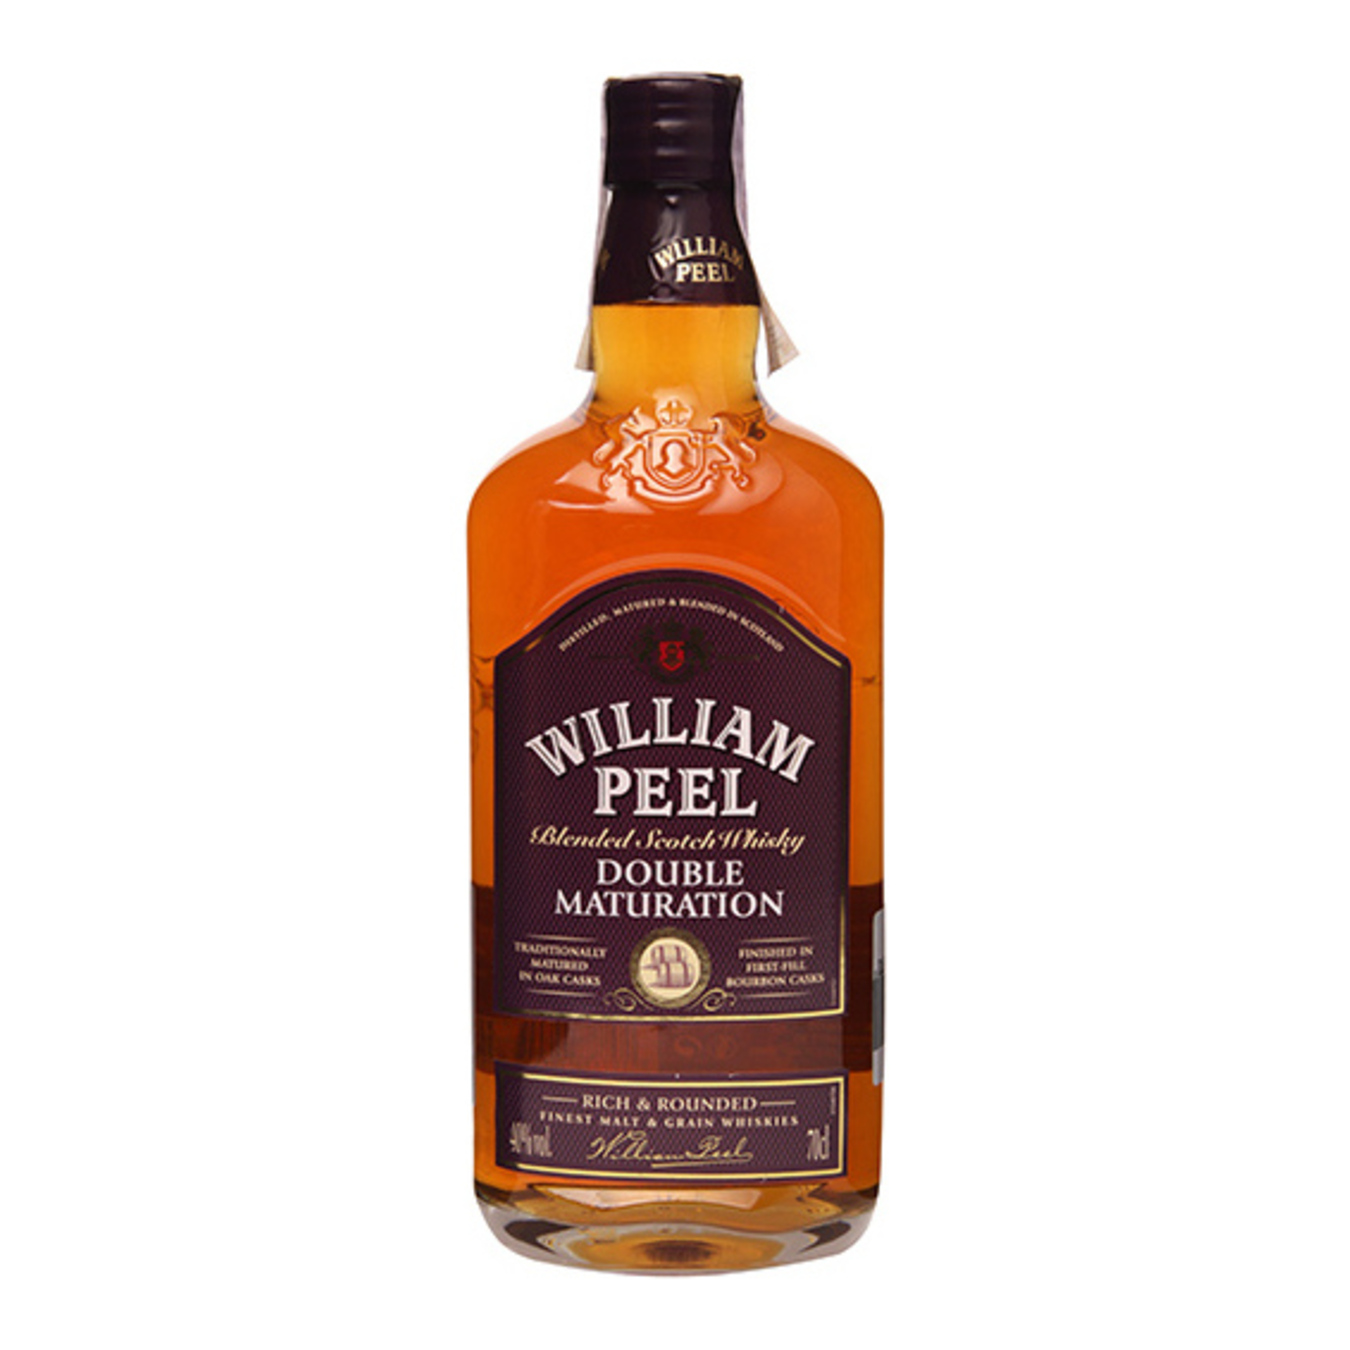 William Peel Double Maturation whisky 40% 0,7l